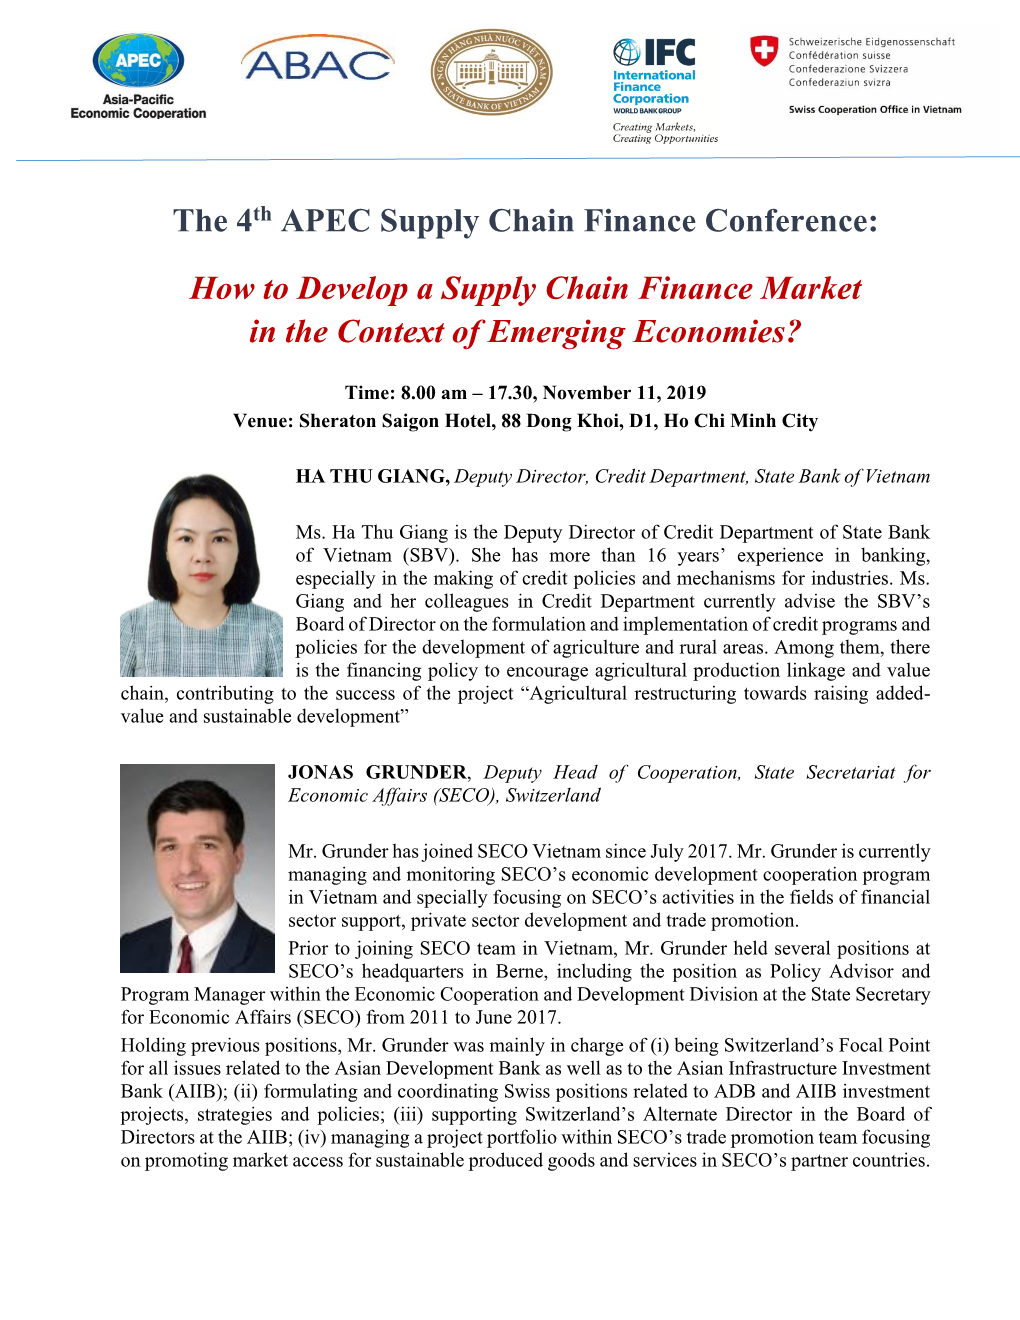 The 4Th APEC Supply Chain Finance Conference: How to Develop A